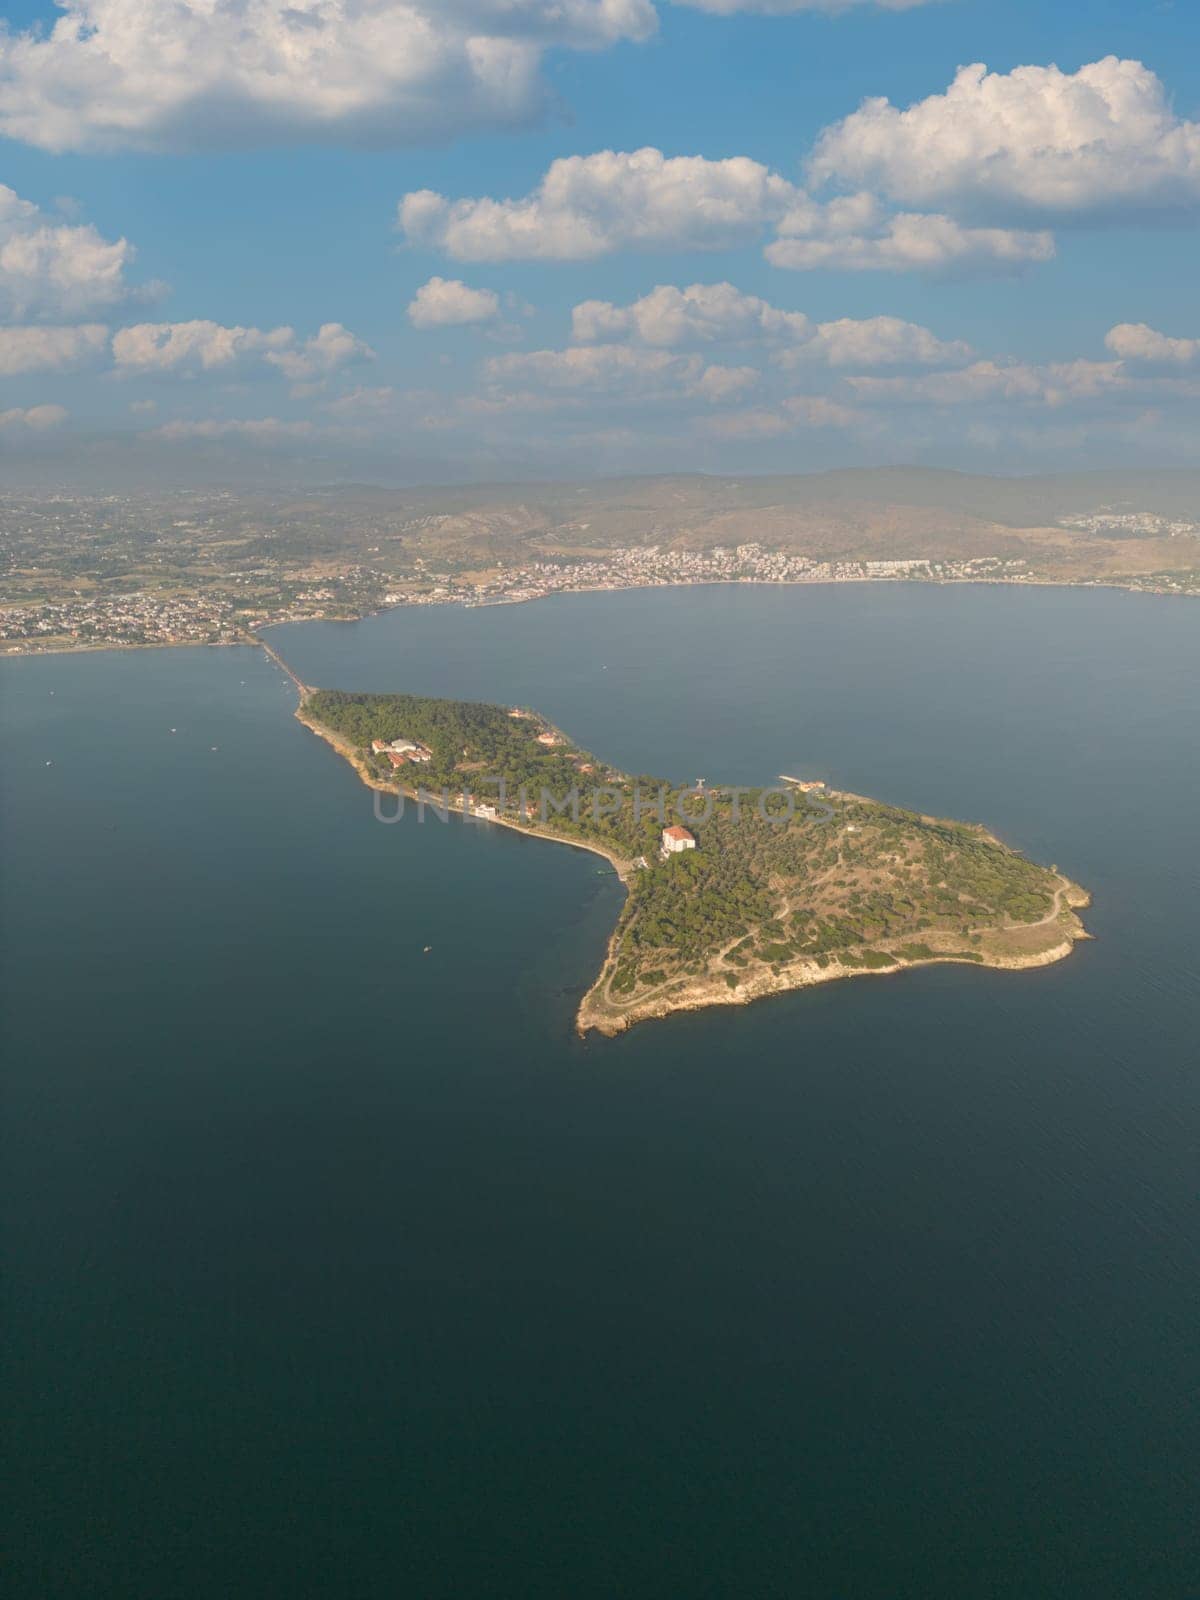 Drone footage at Urla Izmir Province, Turkey. Known as Quarantine Island. During the 19th century the island was equipped with the up to date medical instruments and it was used as a quarantine island by senkaya